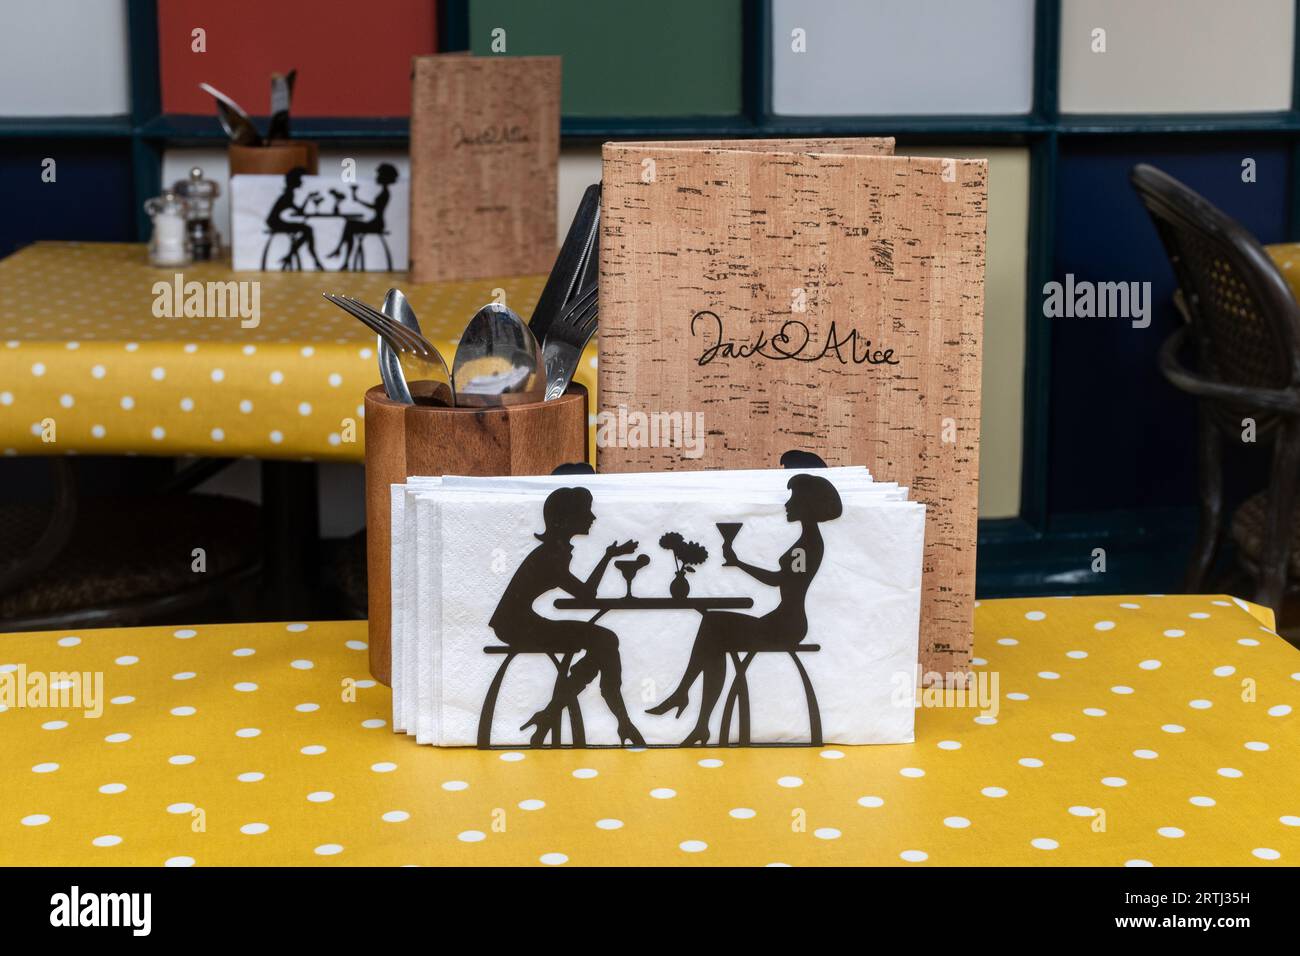 Tables set outside a restaurant with unusual napkin holders, cutlery and menu, England, UK Stock Photo